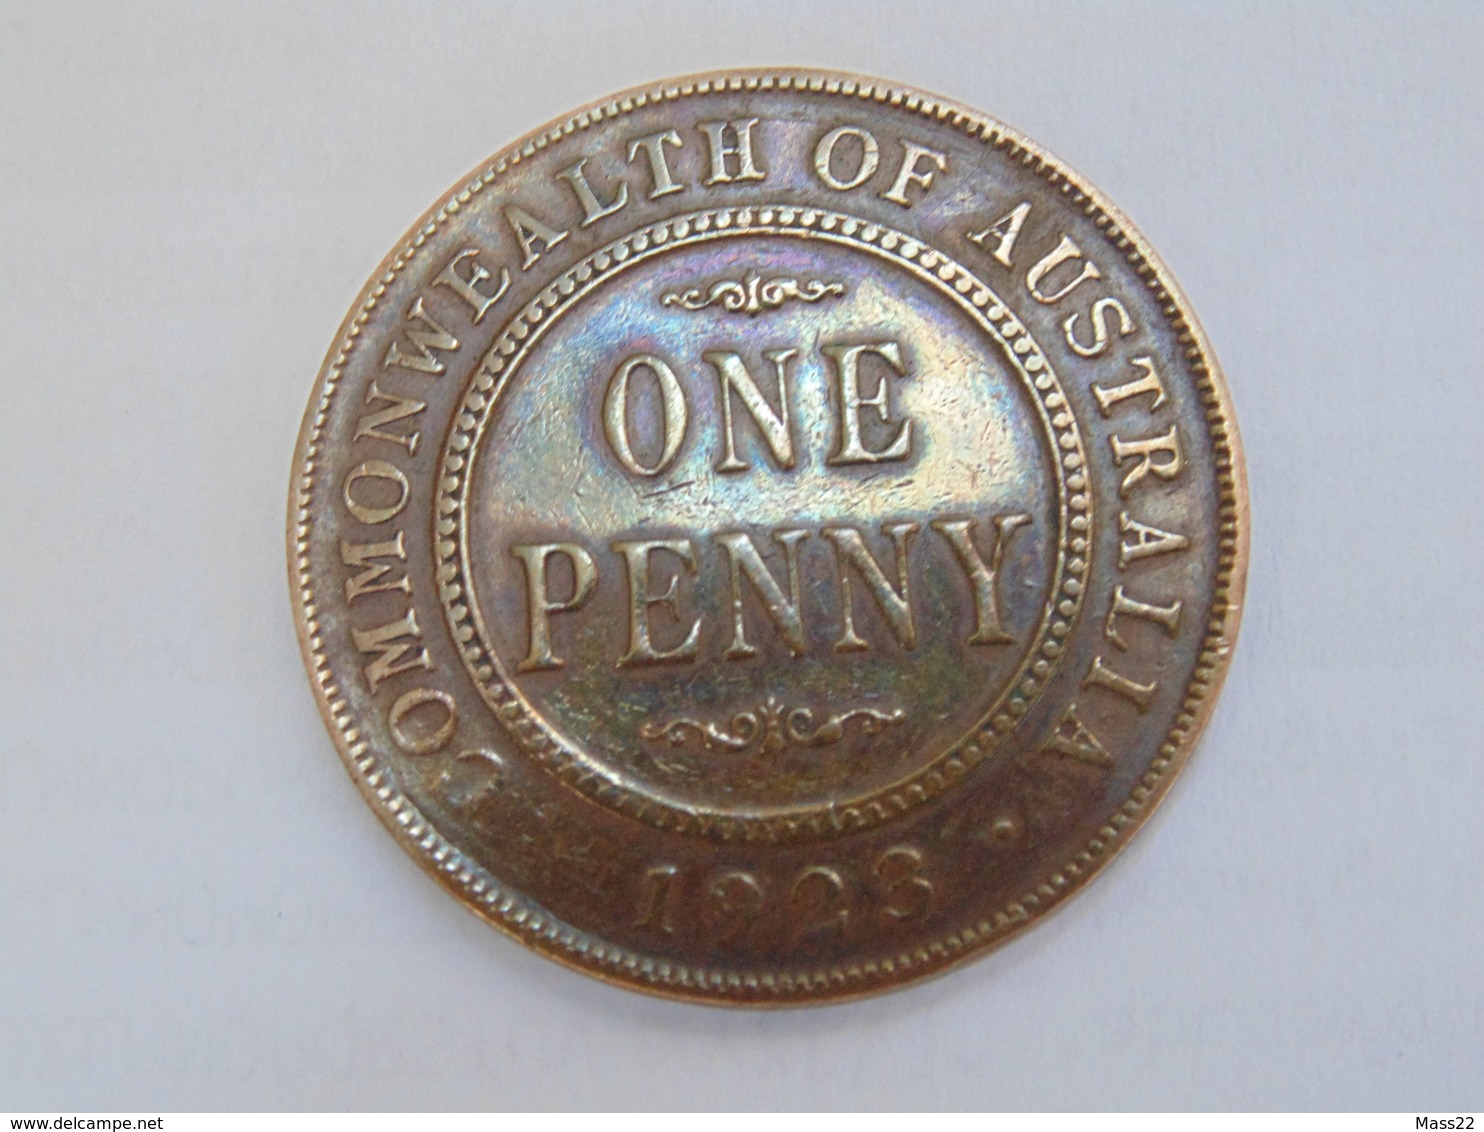 Australian 1 penny 1923, King George V, Specimen or Proof-like Coin with Cracked Die